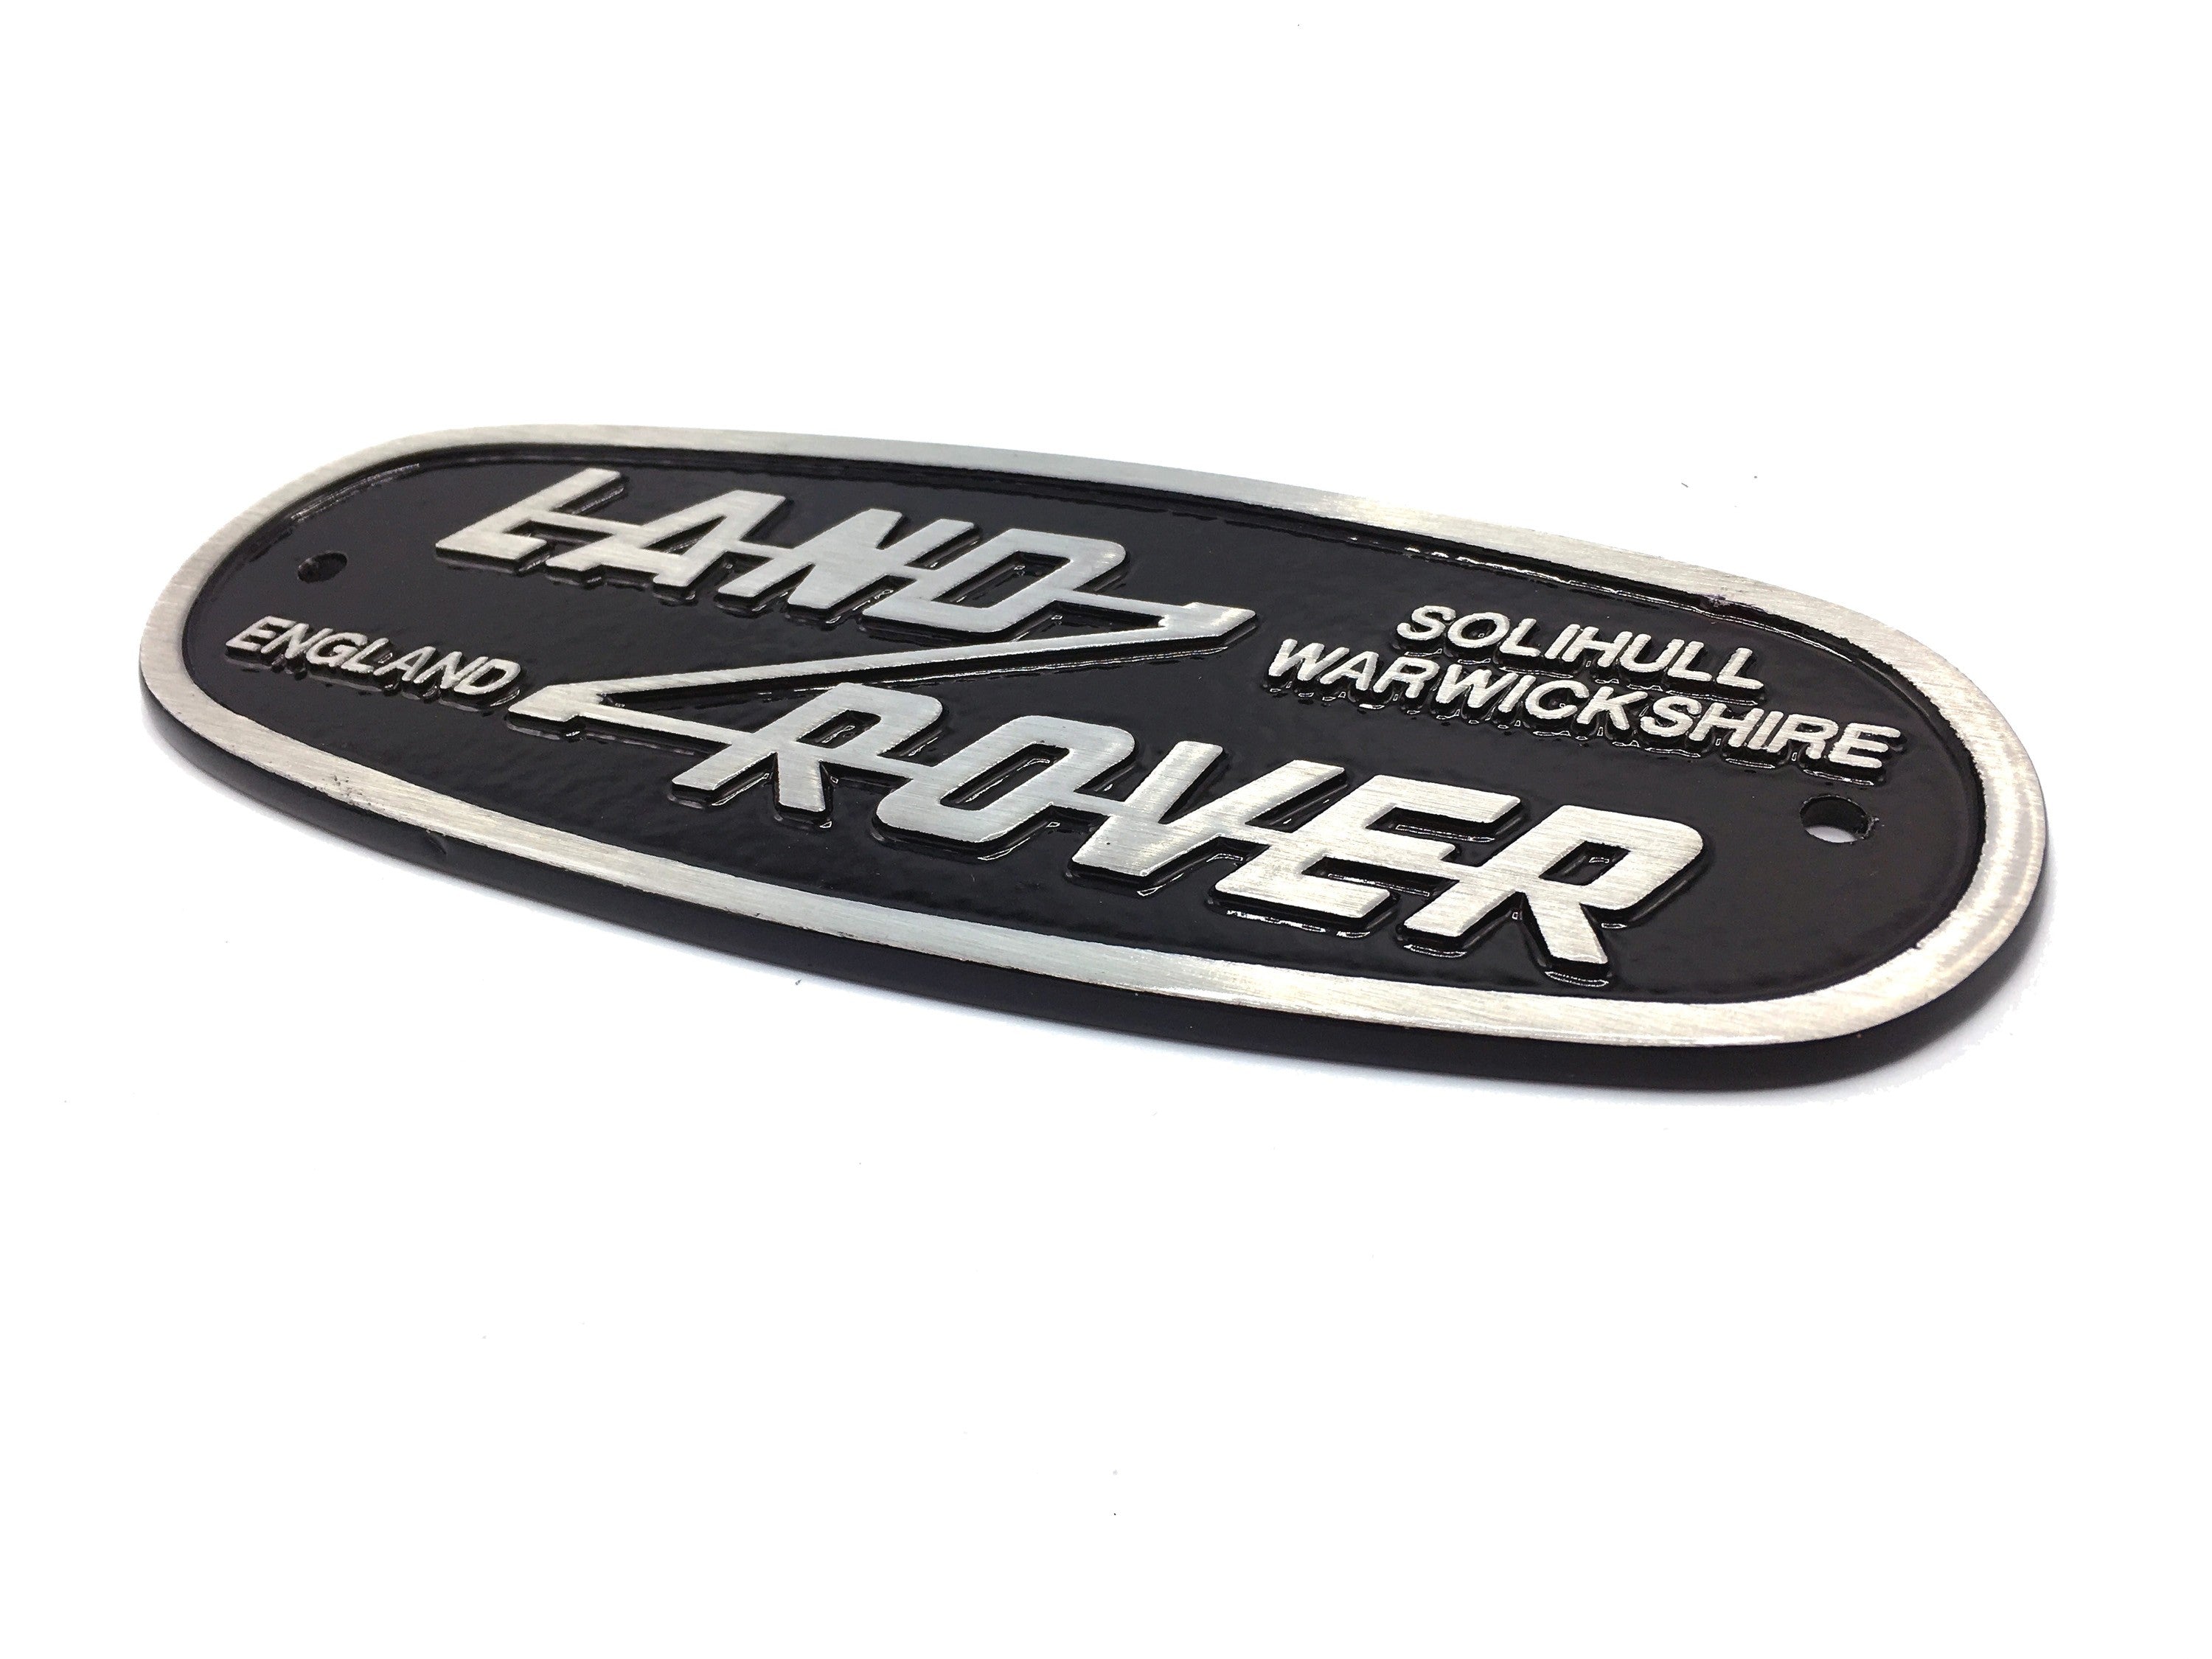 "Land Rover Solihull" Oval Grille Badge (Cast Aluminum) - for Series or Defender